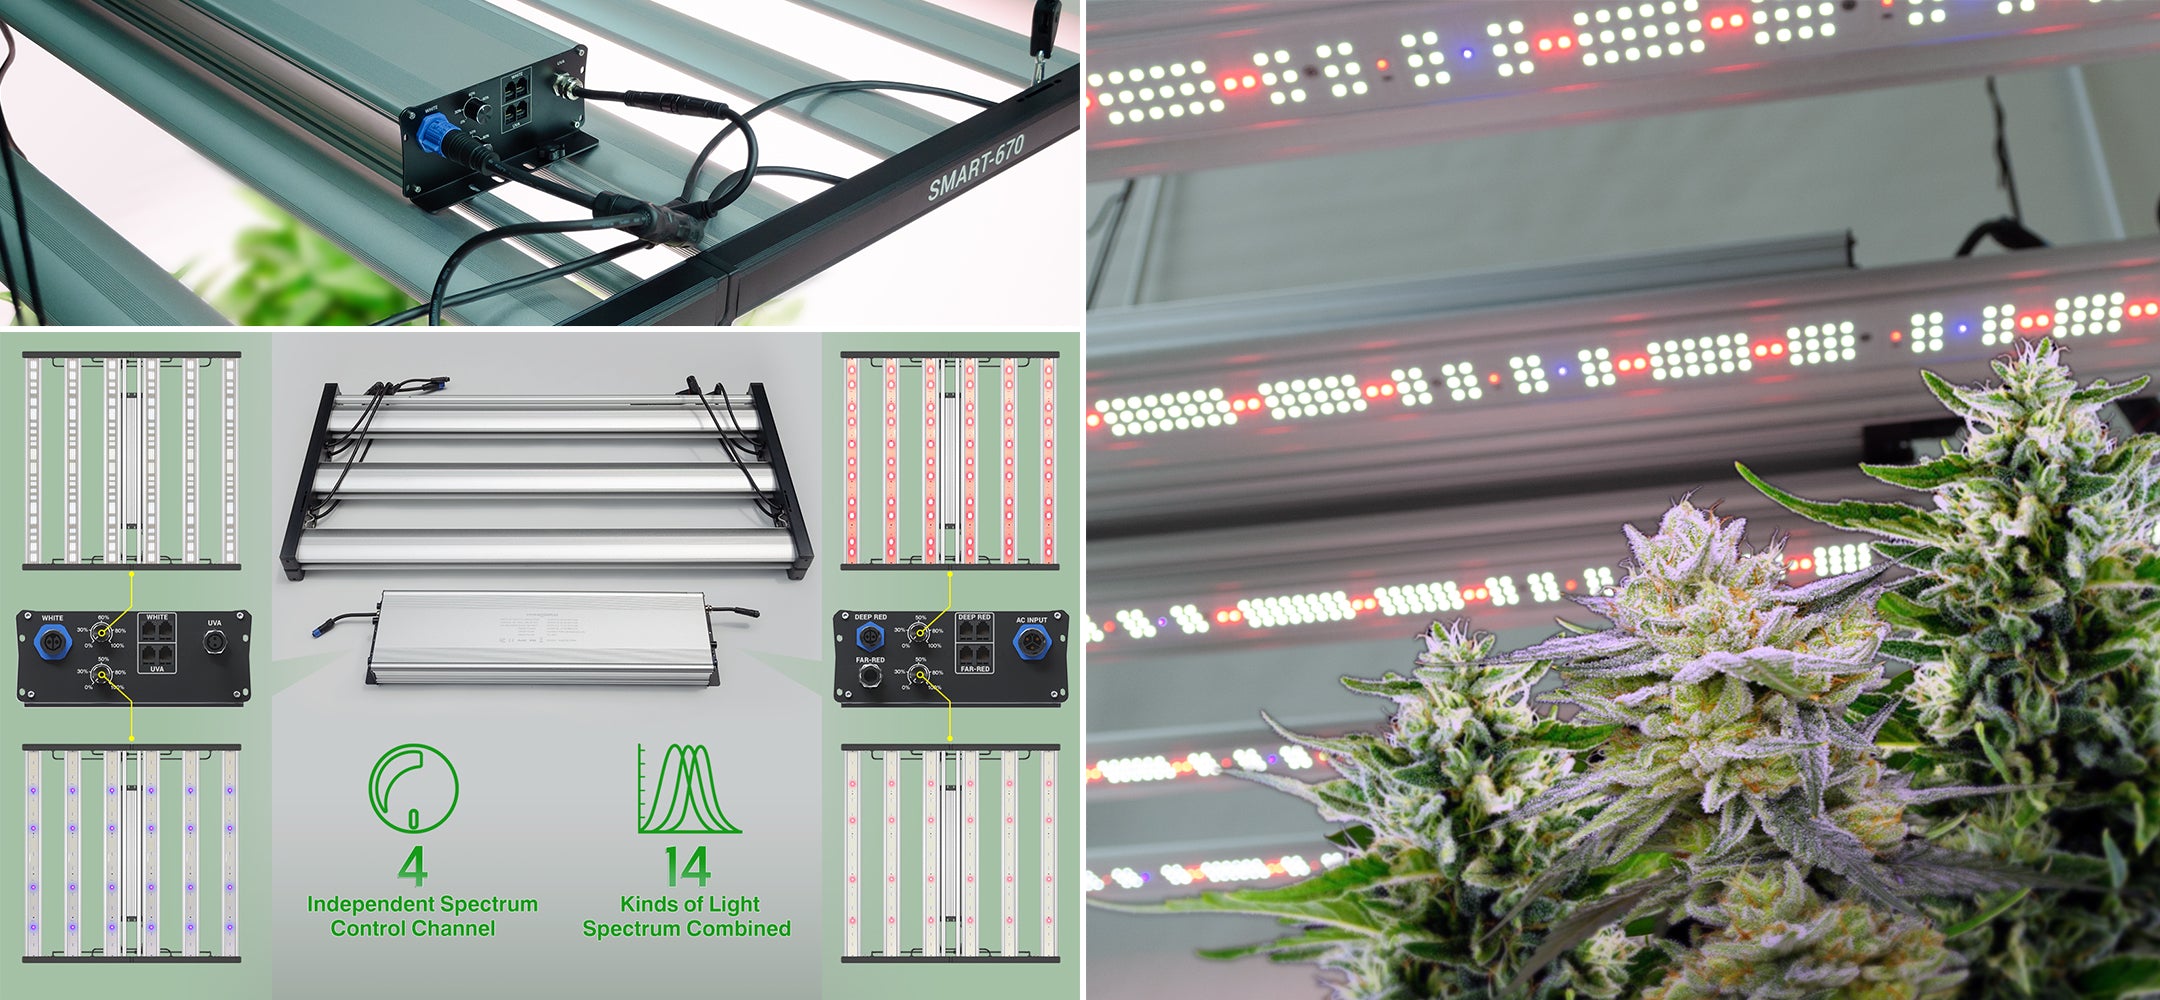 LED grow light unique spectrum tuning design-4 independent control channels of UV,IR,Infrared,full spectrum